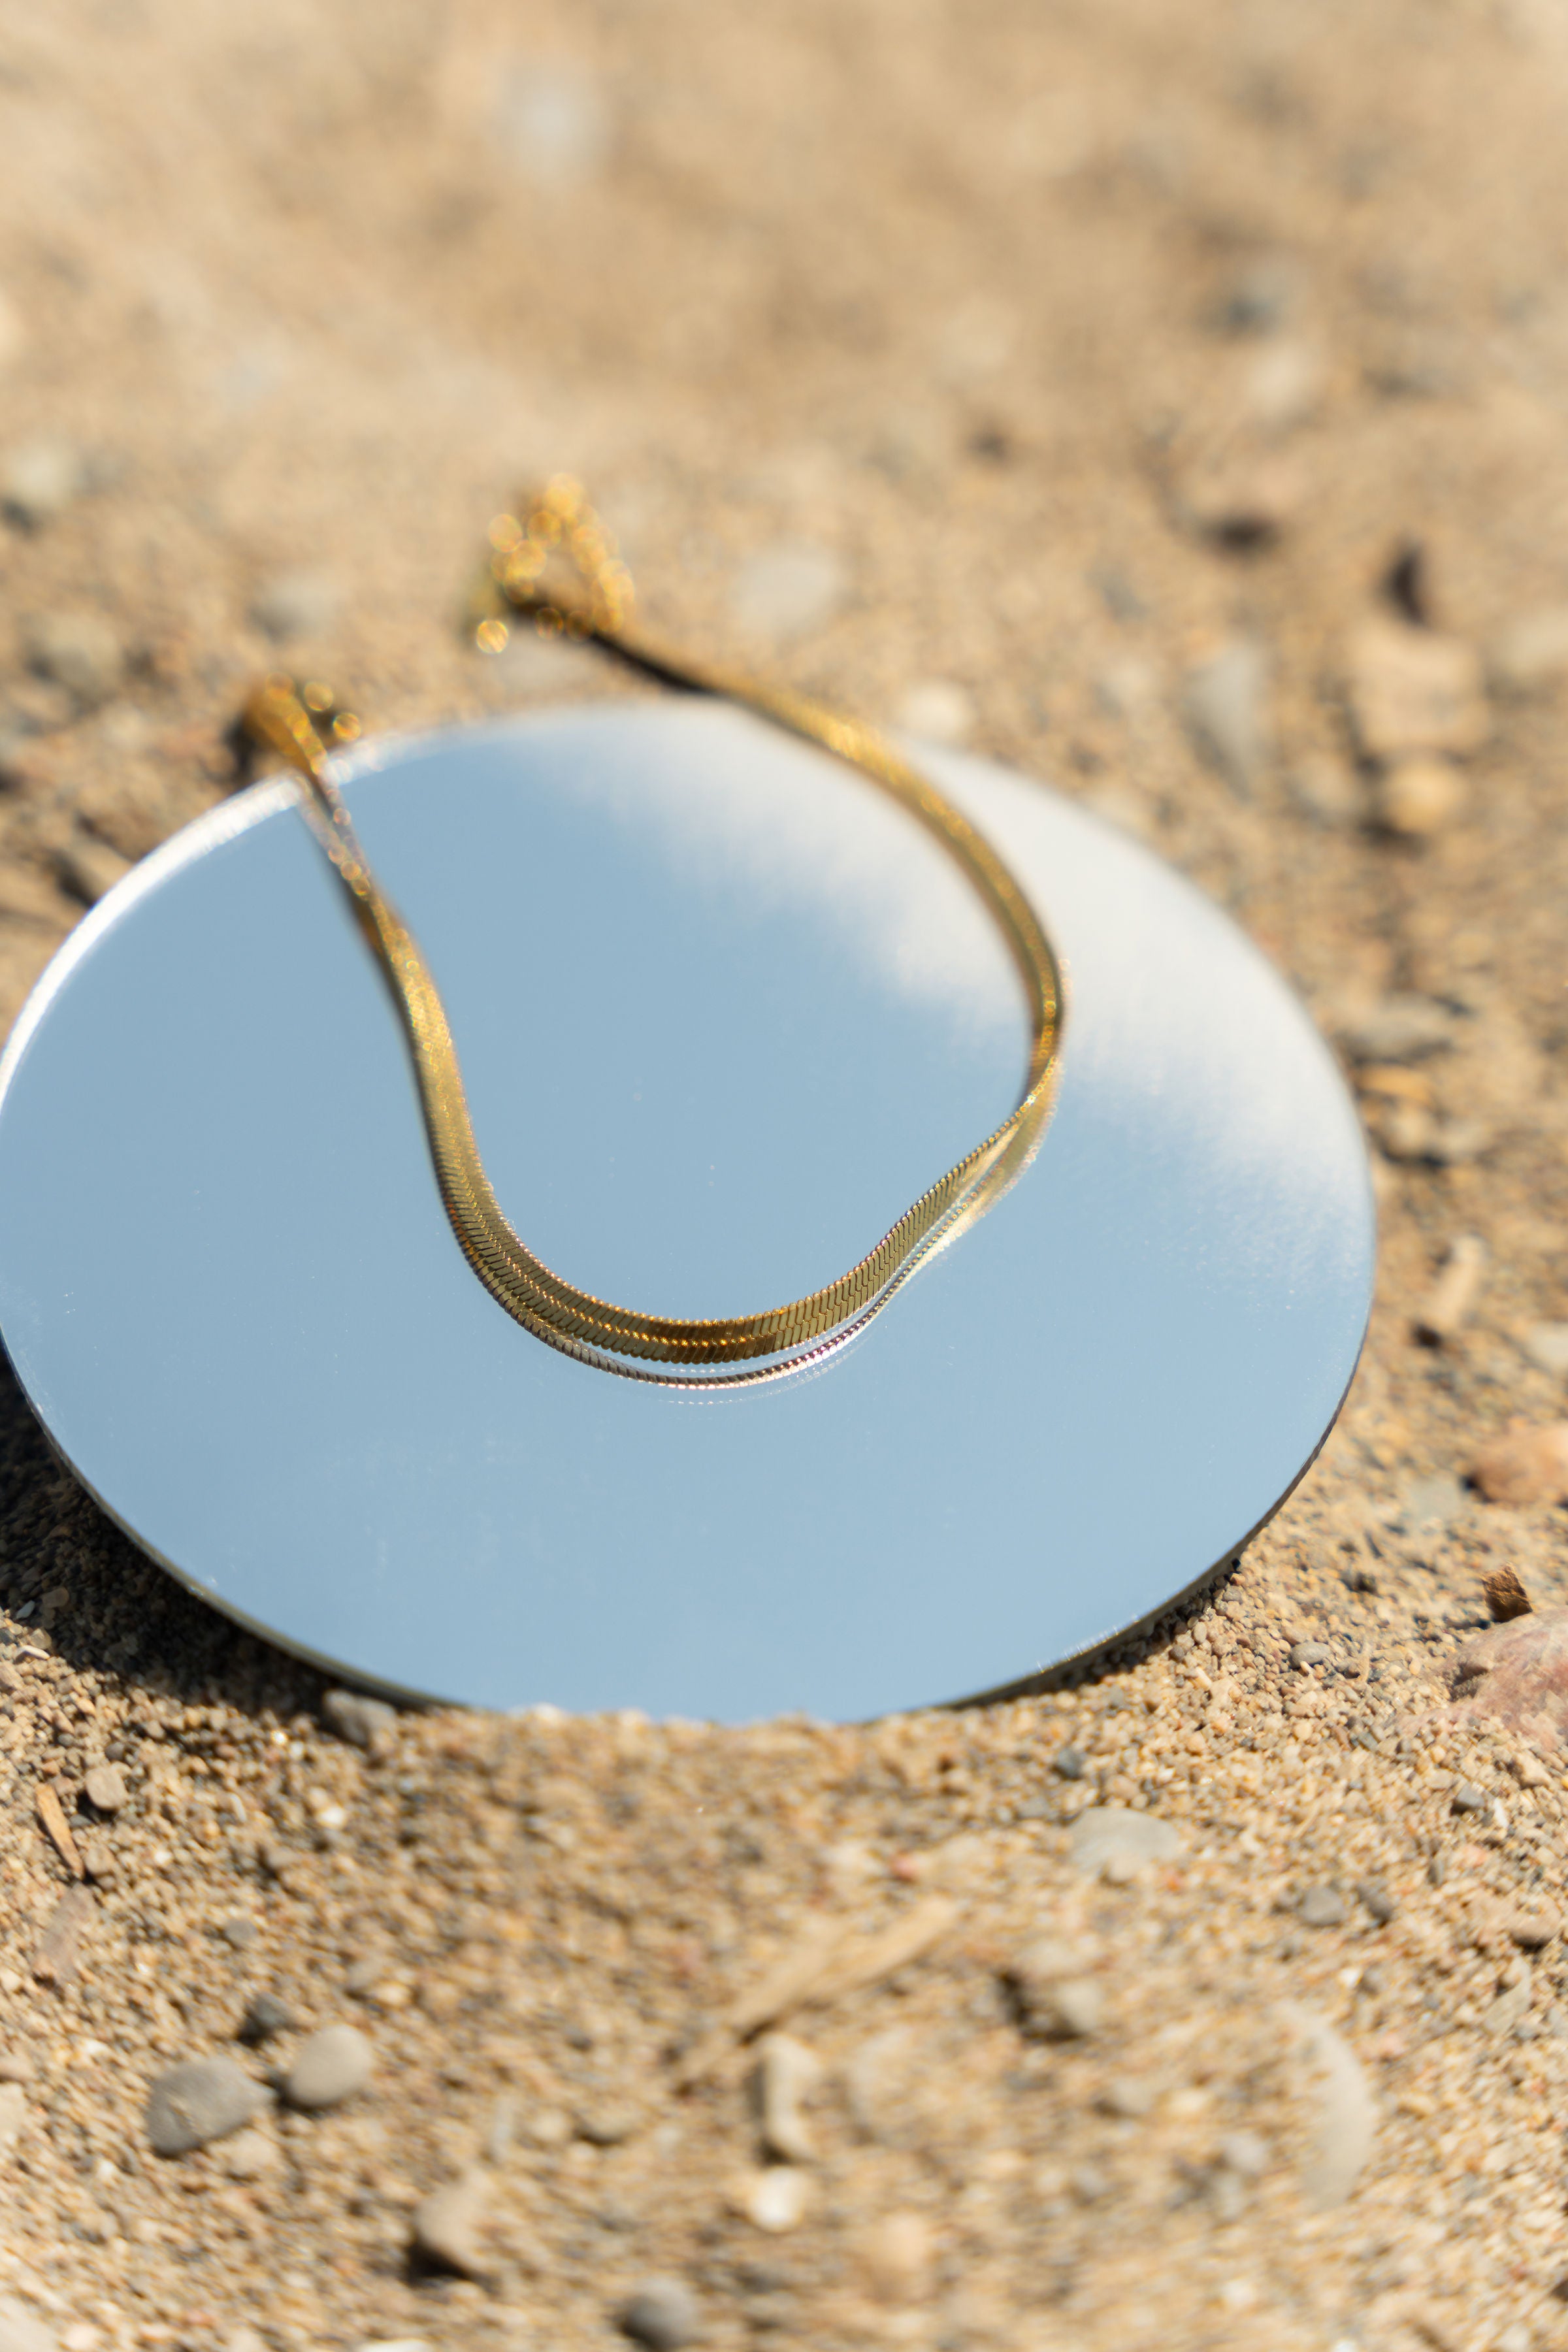 18k gold stainless steel anklet resting on top of a round mirror on the sand.